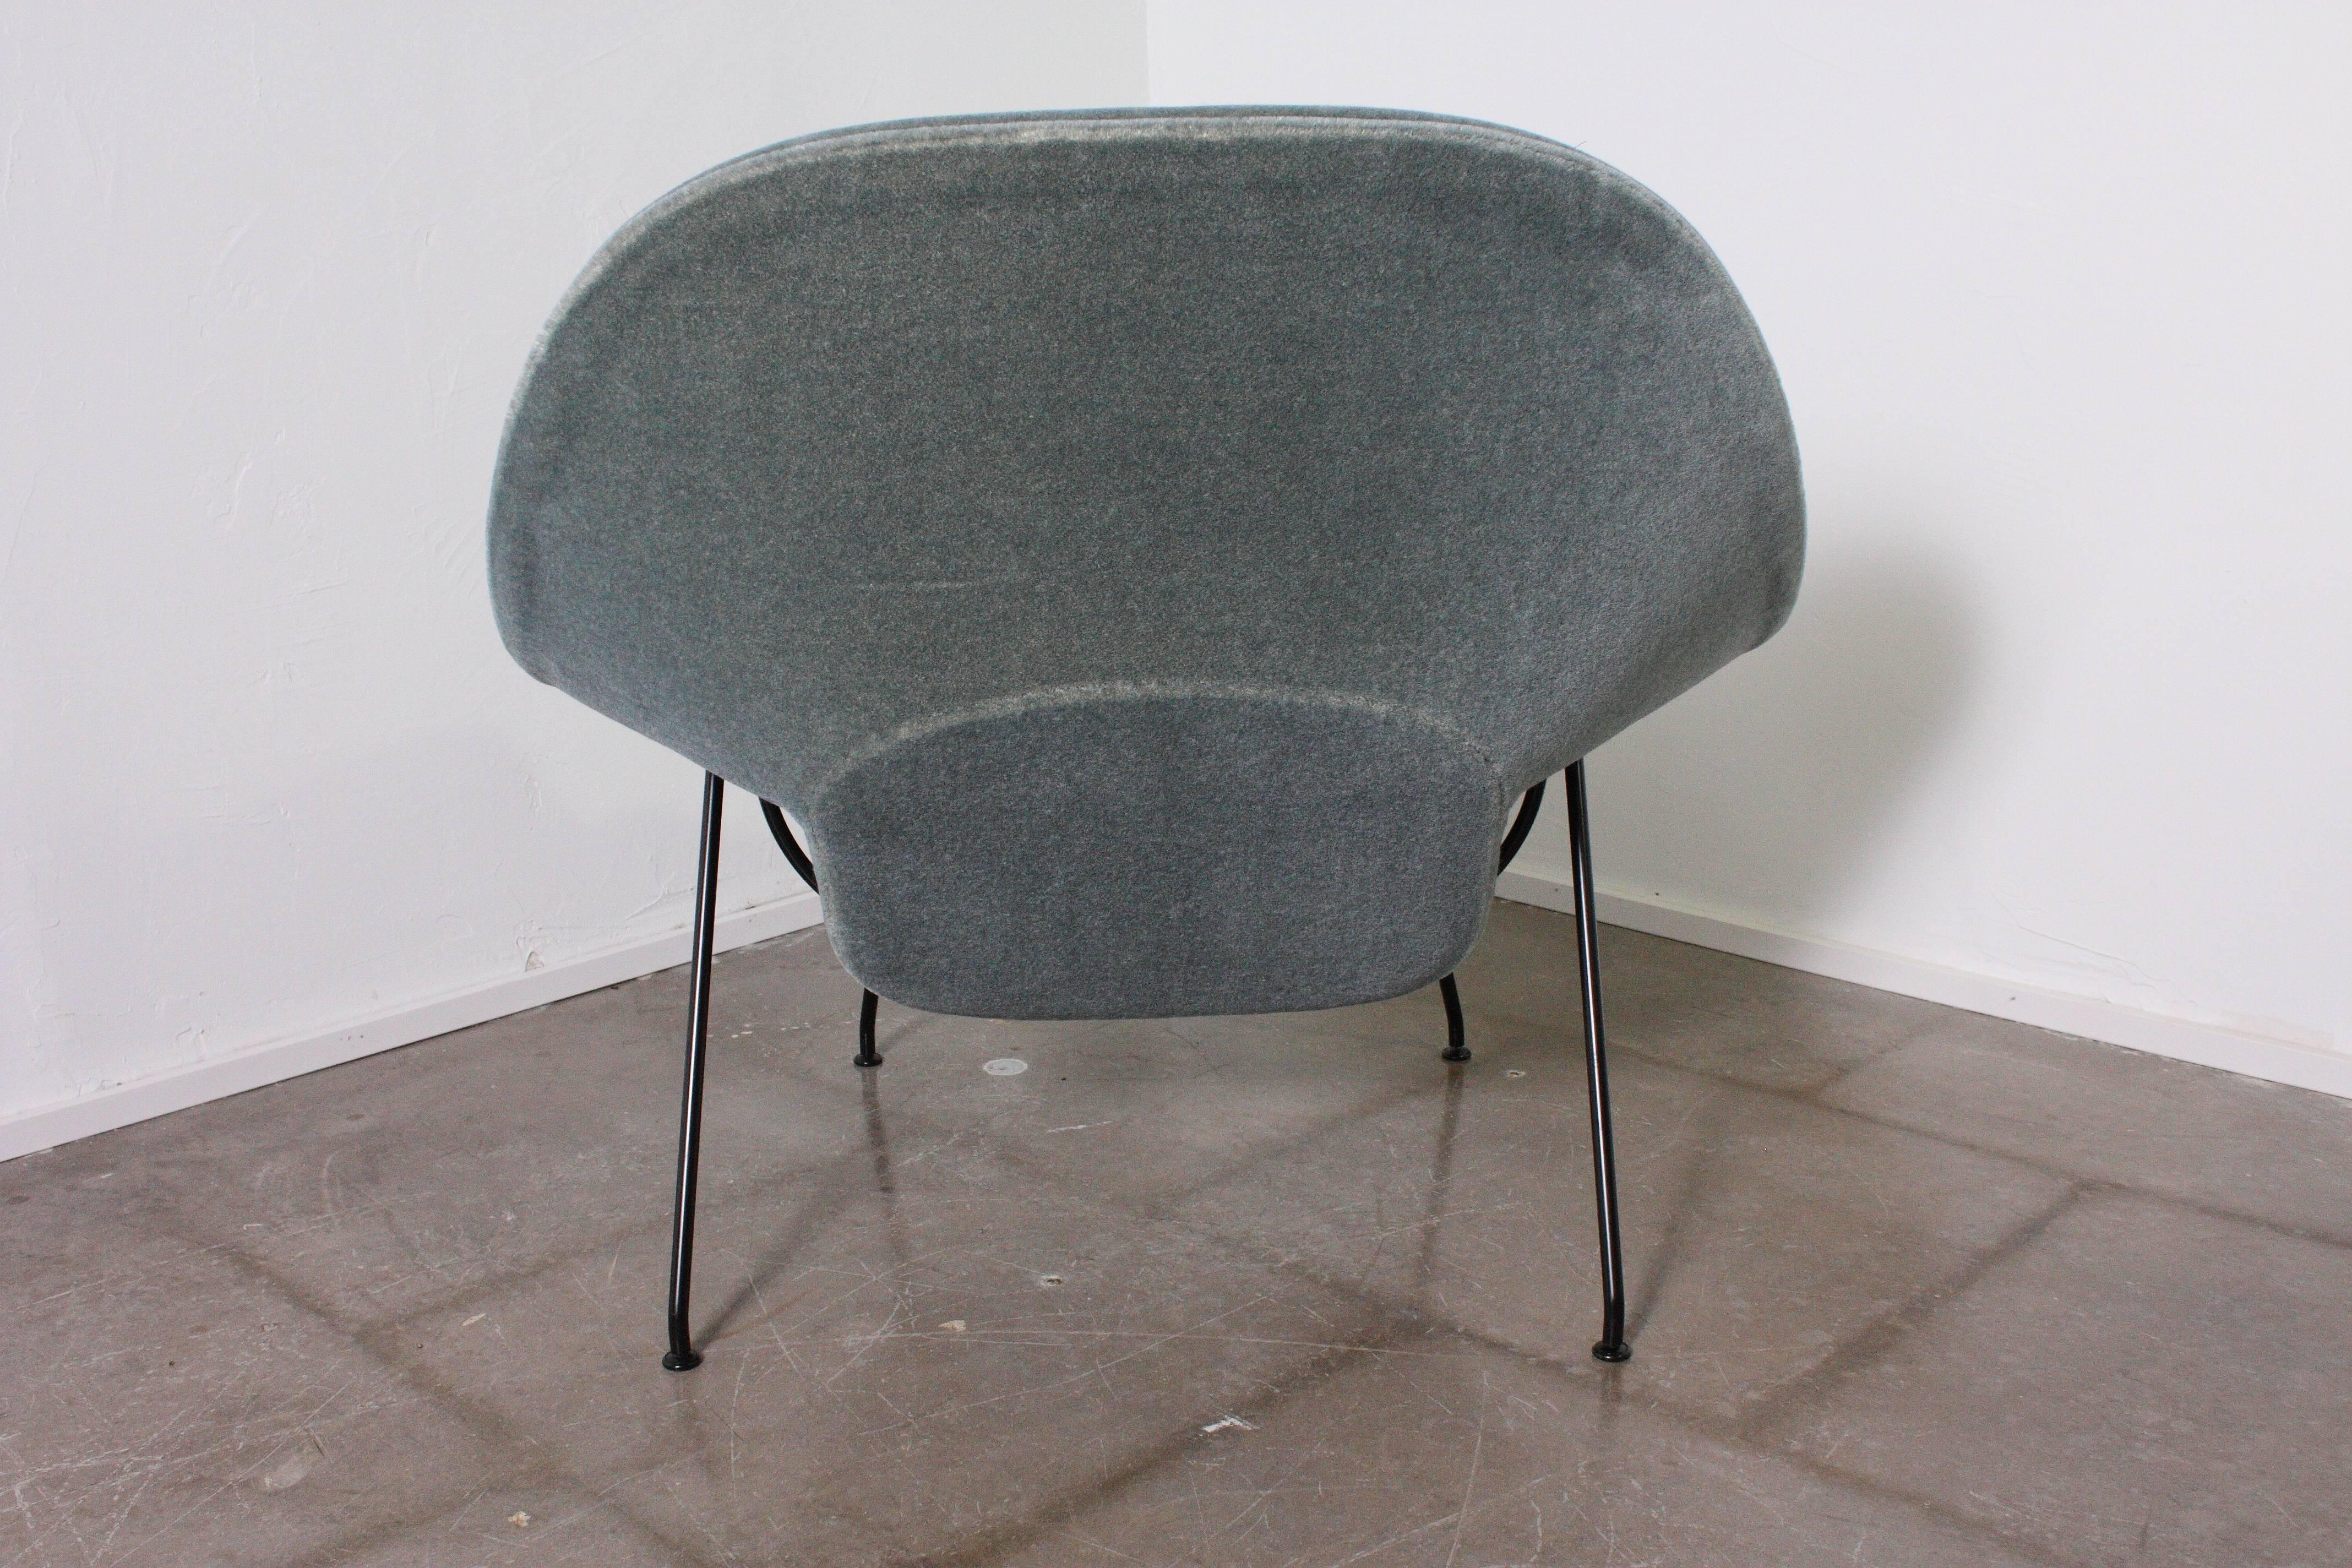 Mid-Century Modern Womb Chair by Eero Saarinen for Knoll Upholstered in Grade I Knoll Mohair